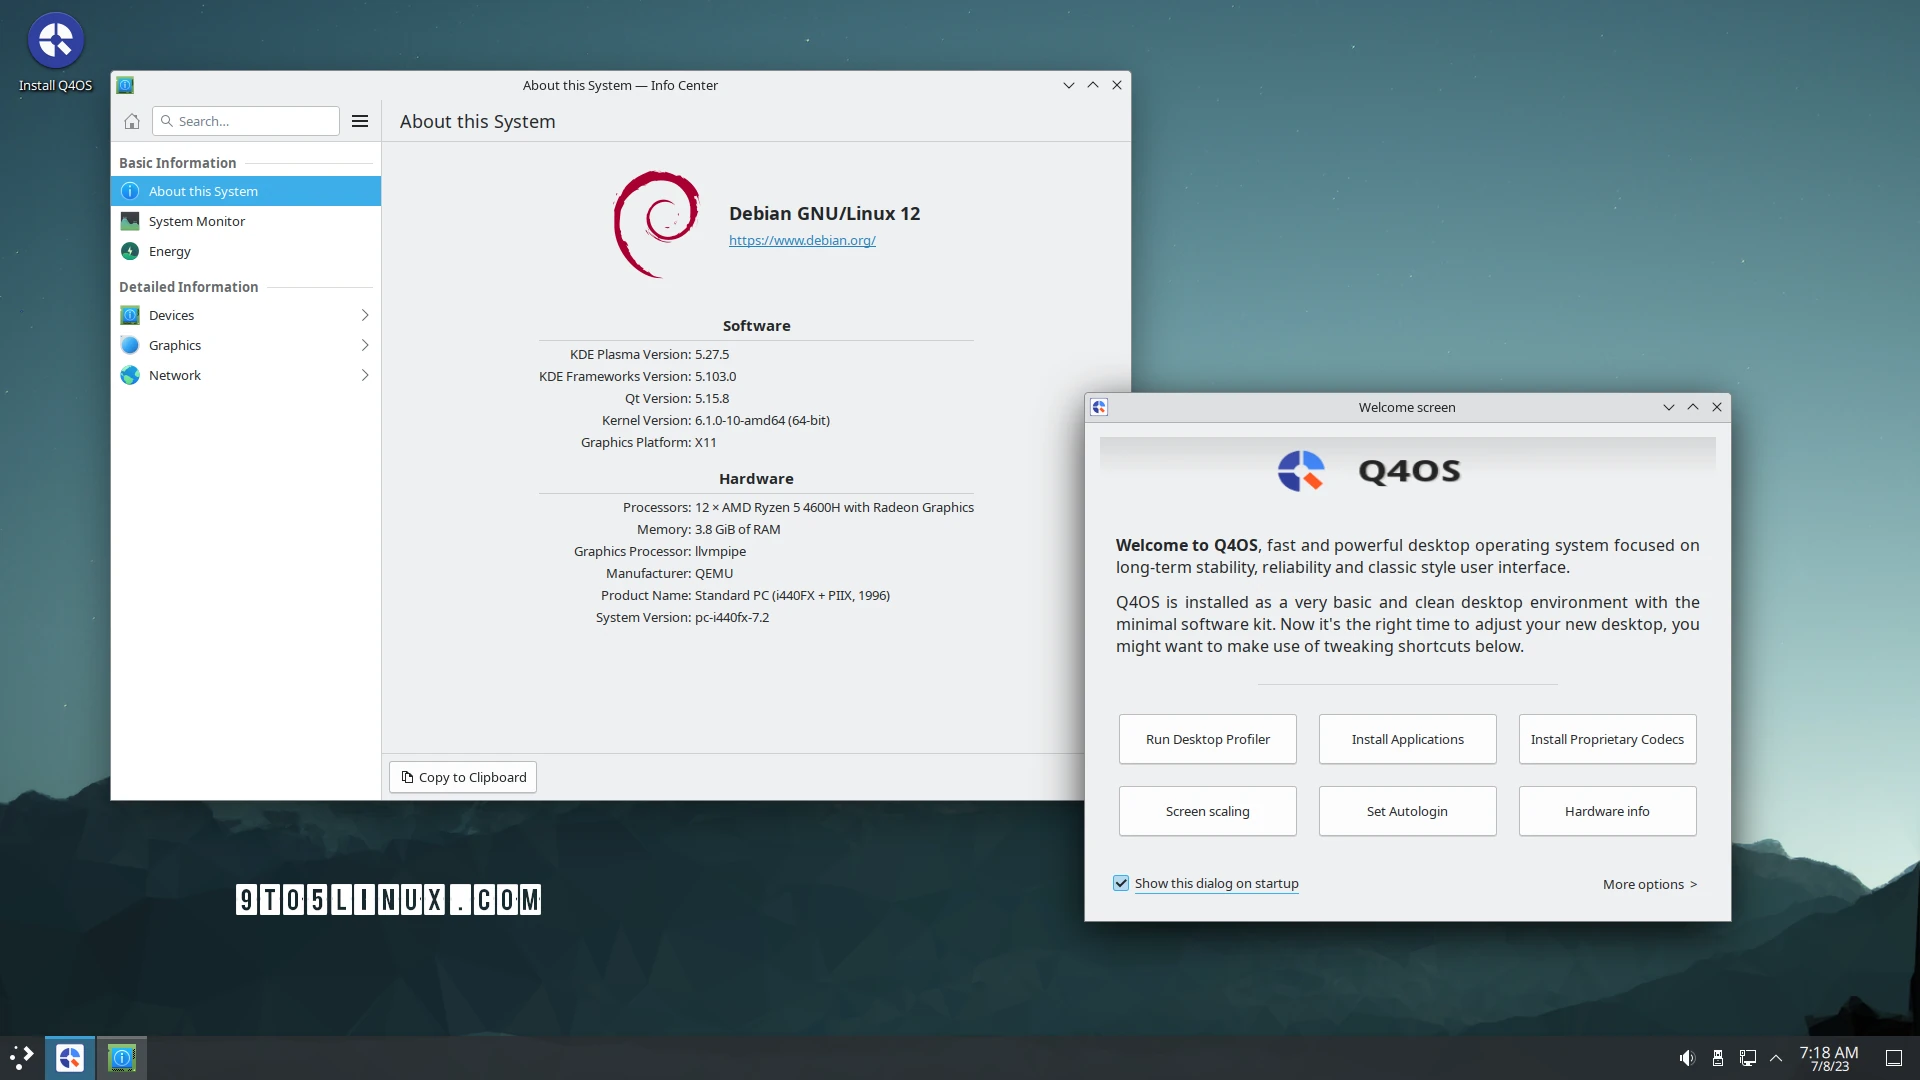 Lightweight Distro Q4OS 5.2 “Aquarius” Is Out Based on Debian 12 “Bookworm”